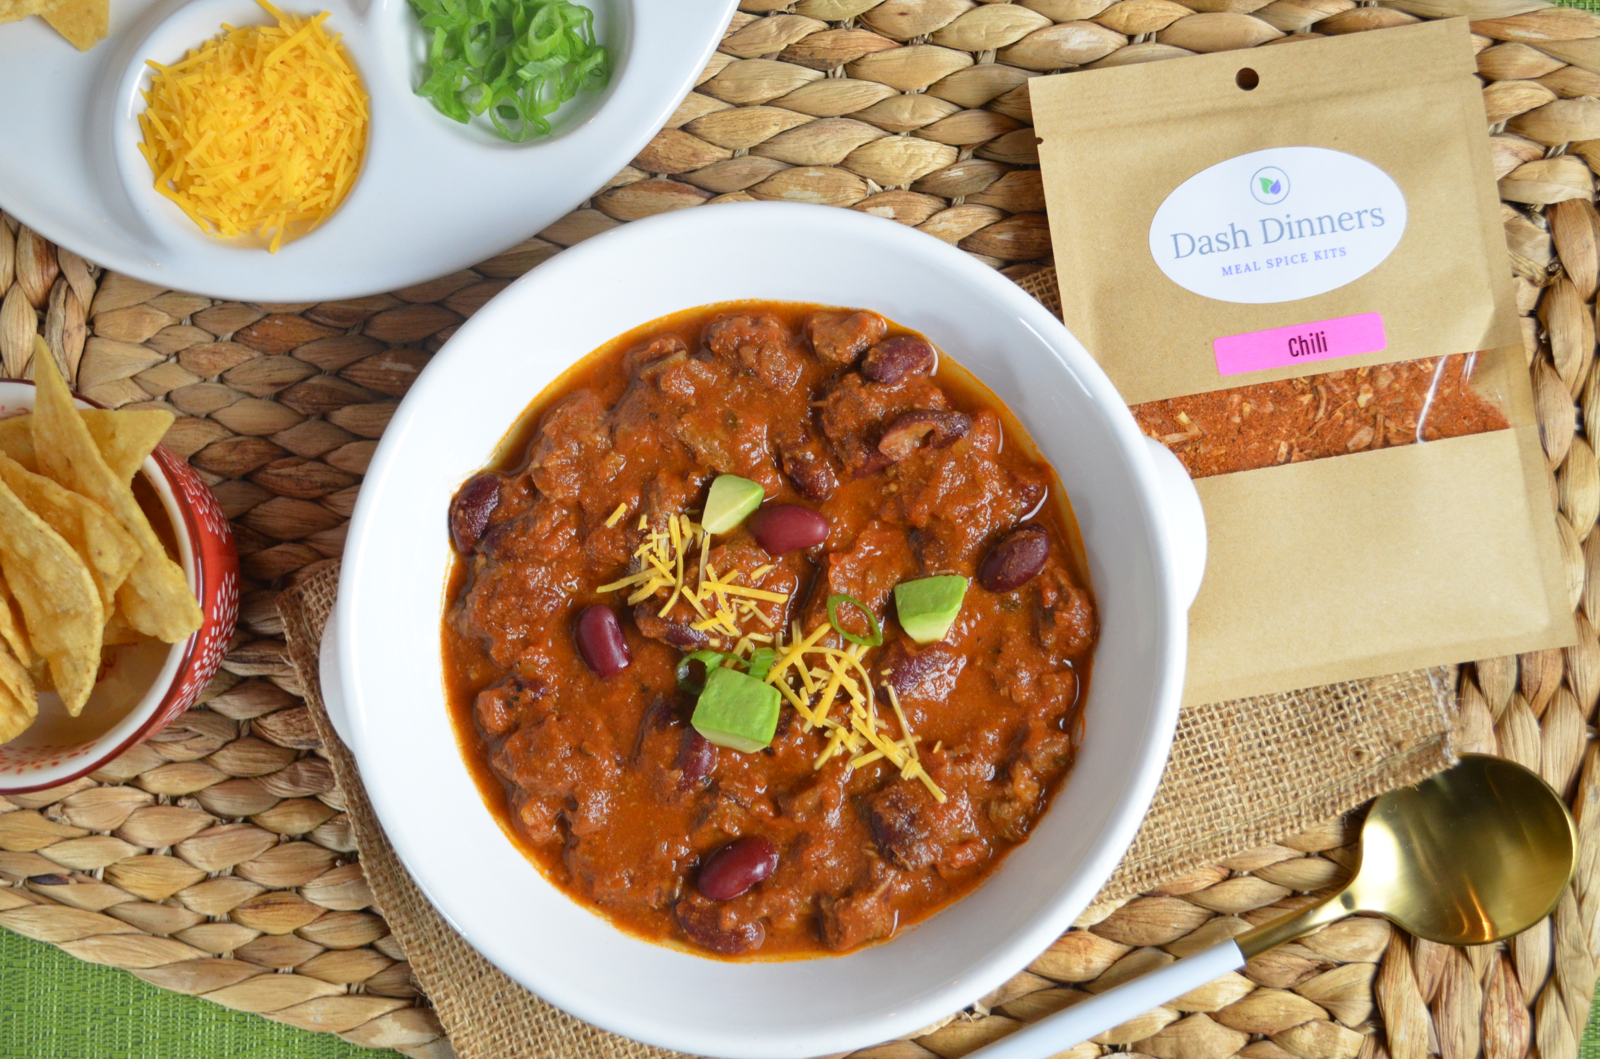 beef-chili-spice-kit-15-oz-for-slow-cooker-dinner